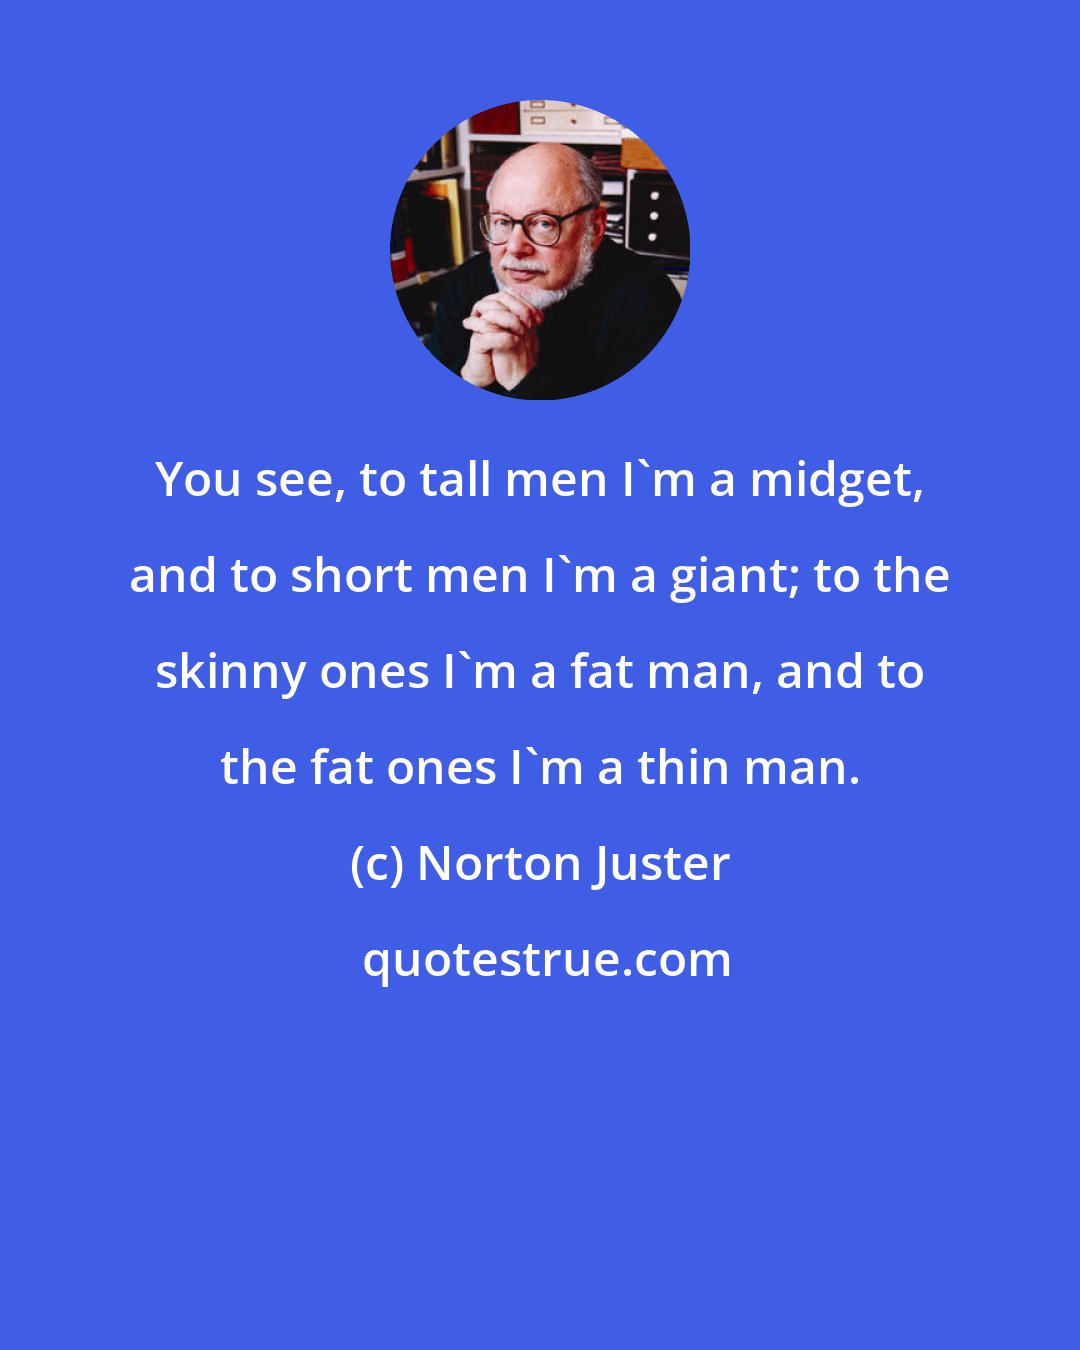 Norton Juster: You see, to tall men I'm a midget, and to short men I'm a giant; to the skinny ones I'm a fat man, and to the fat ones I'm a thin man.